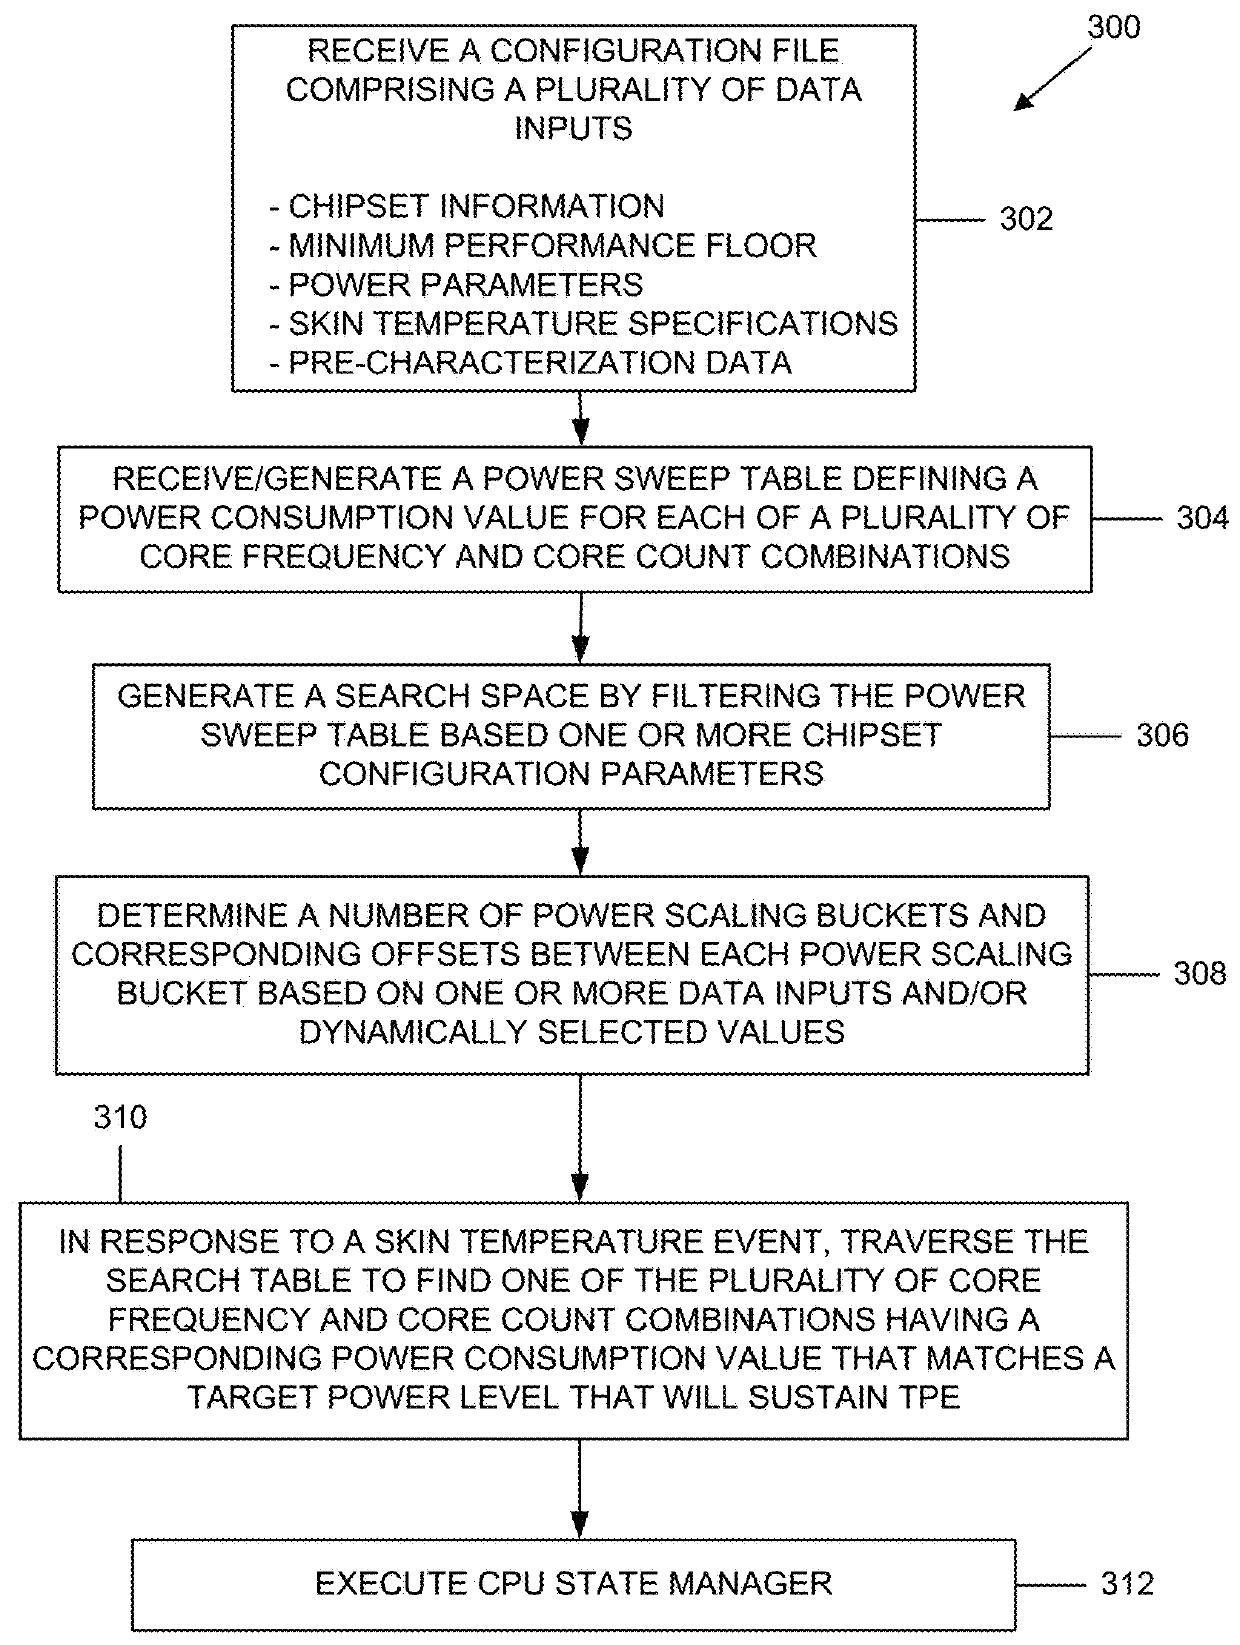 Core frequency/count decision-based thermal mitigation optimization for a multi-core integrated circuit